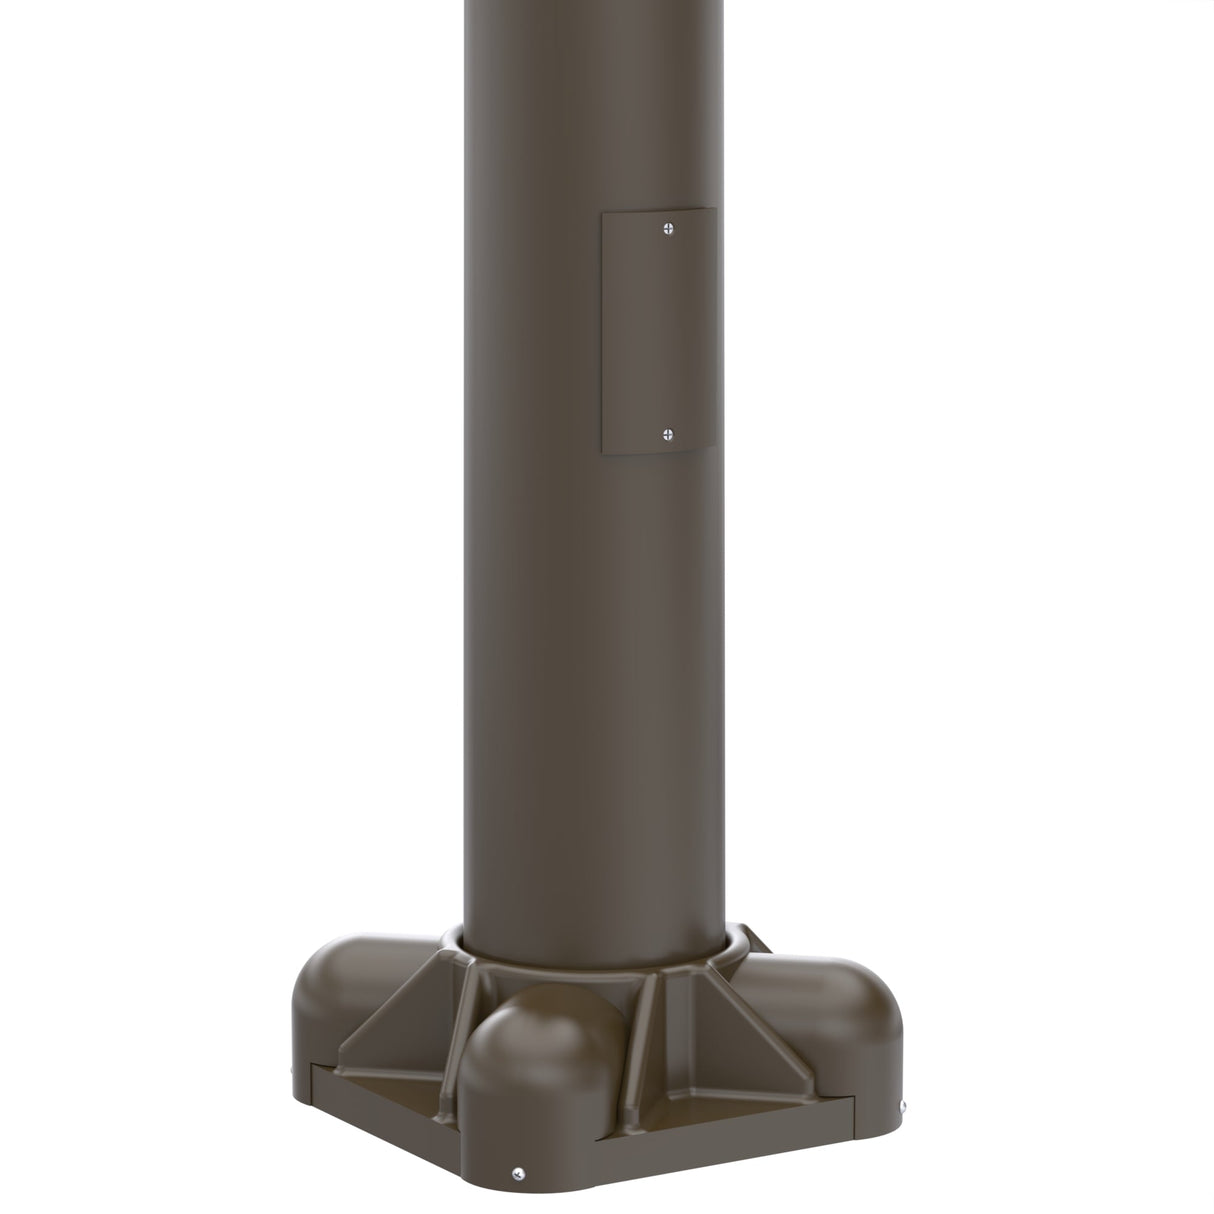 25' Tall x 6.0" Base OD x 4.0" Top OD x 0.188" Thick, Round Tapered Aluminum, Anchor Base Light Pole